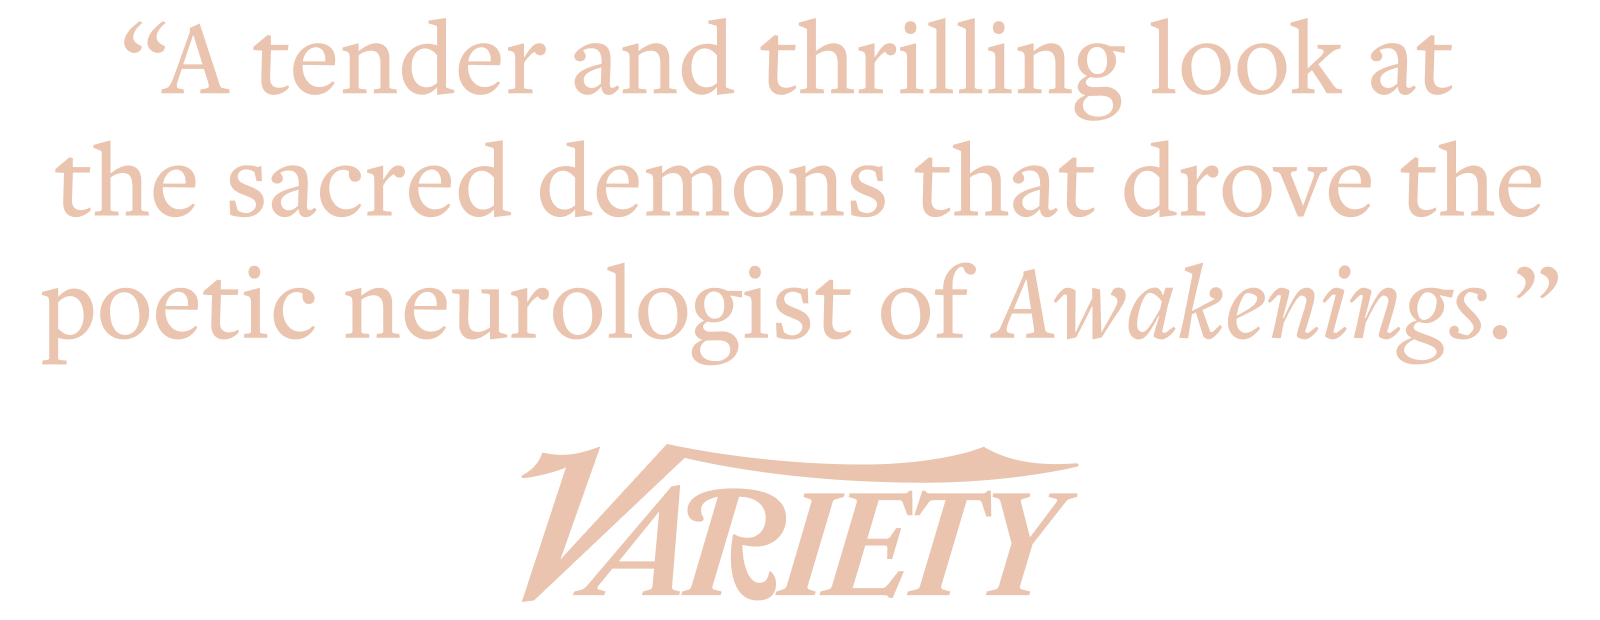 quote-variety@2x.png